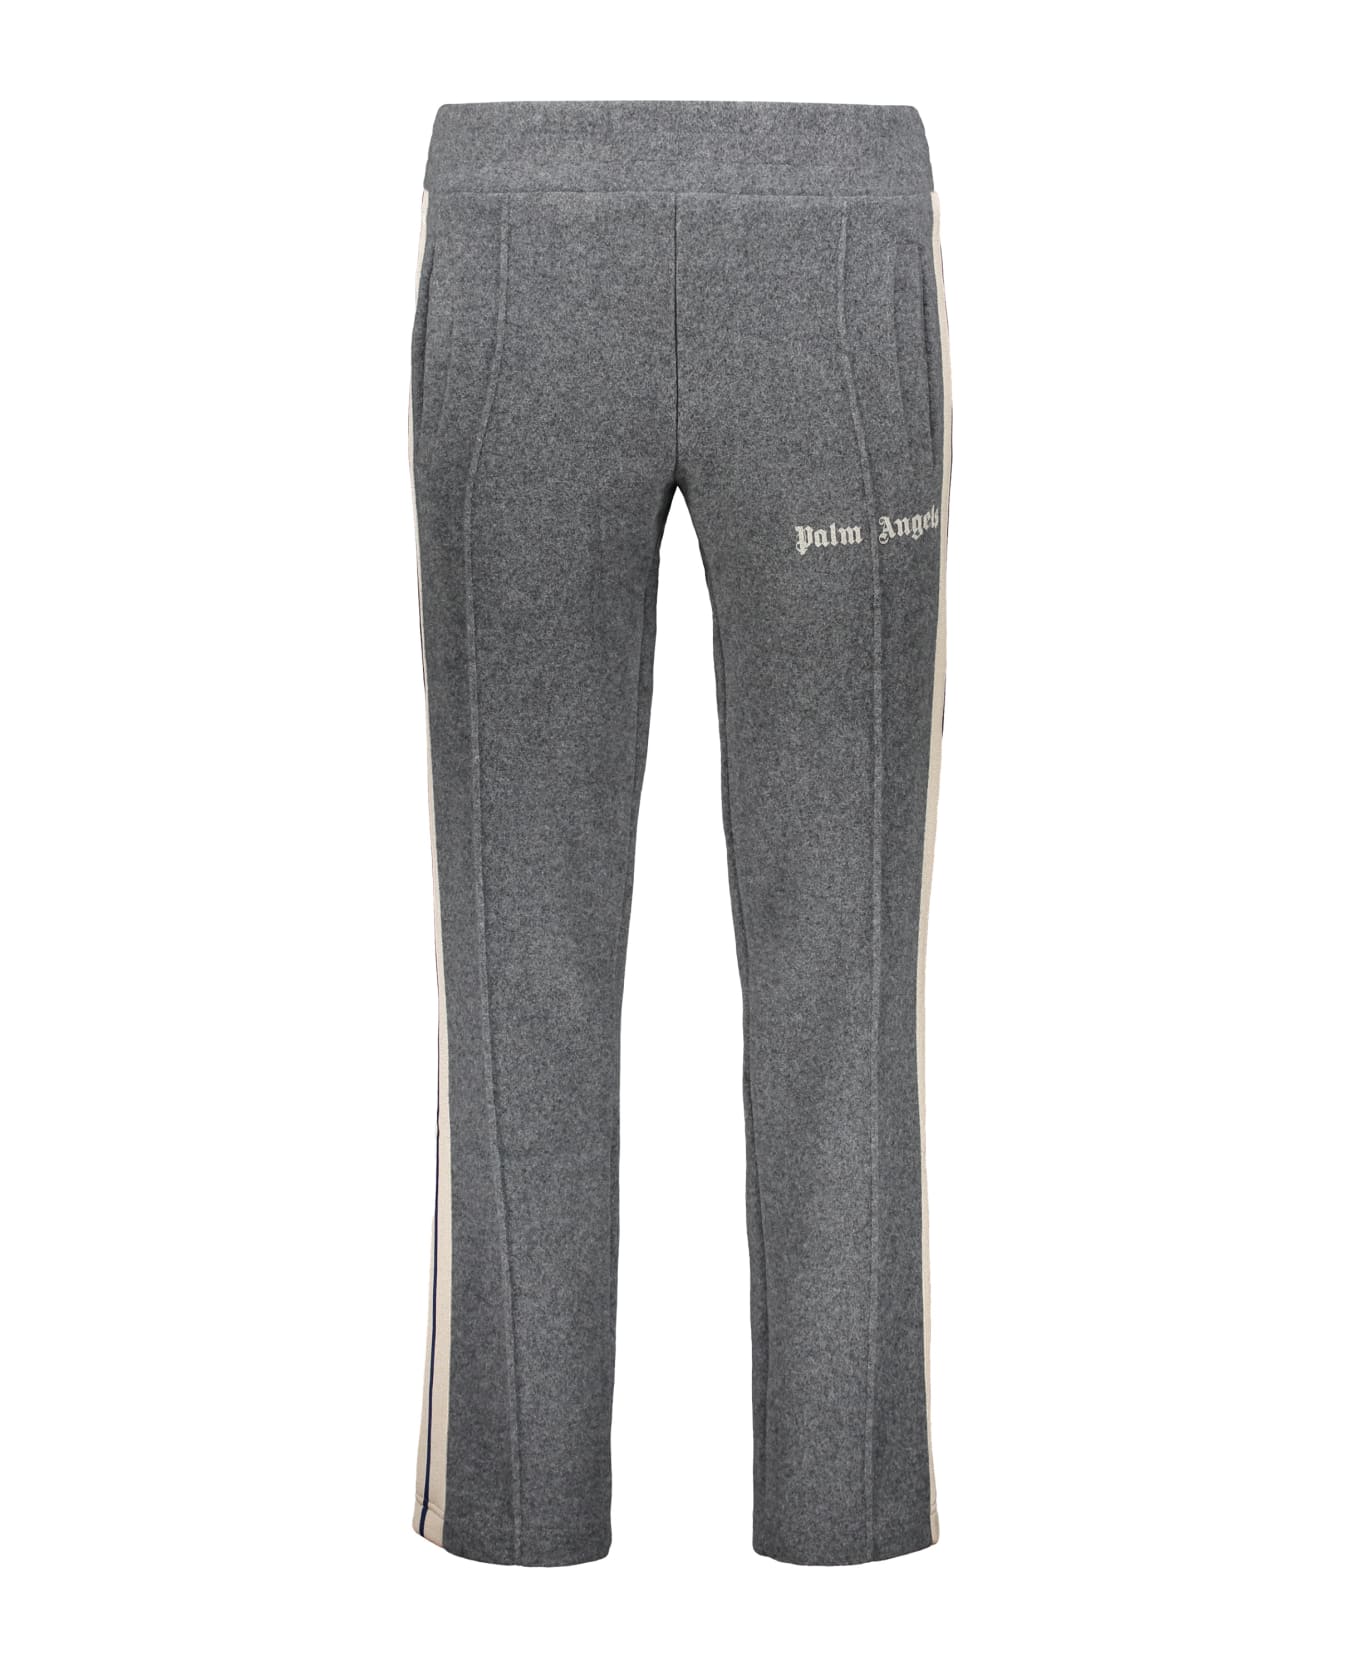 Palm Angels Track-pants With Decorative Stripes - grey